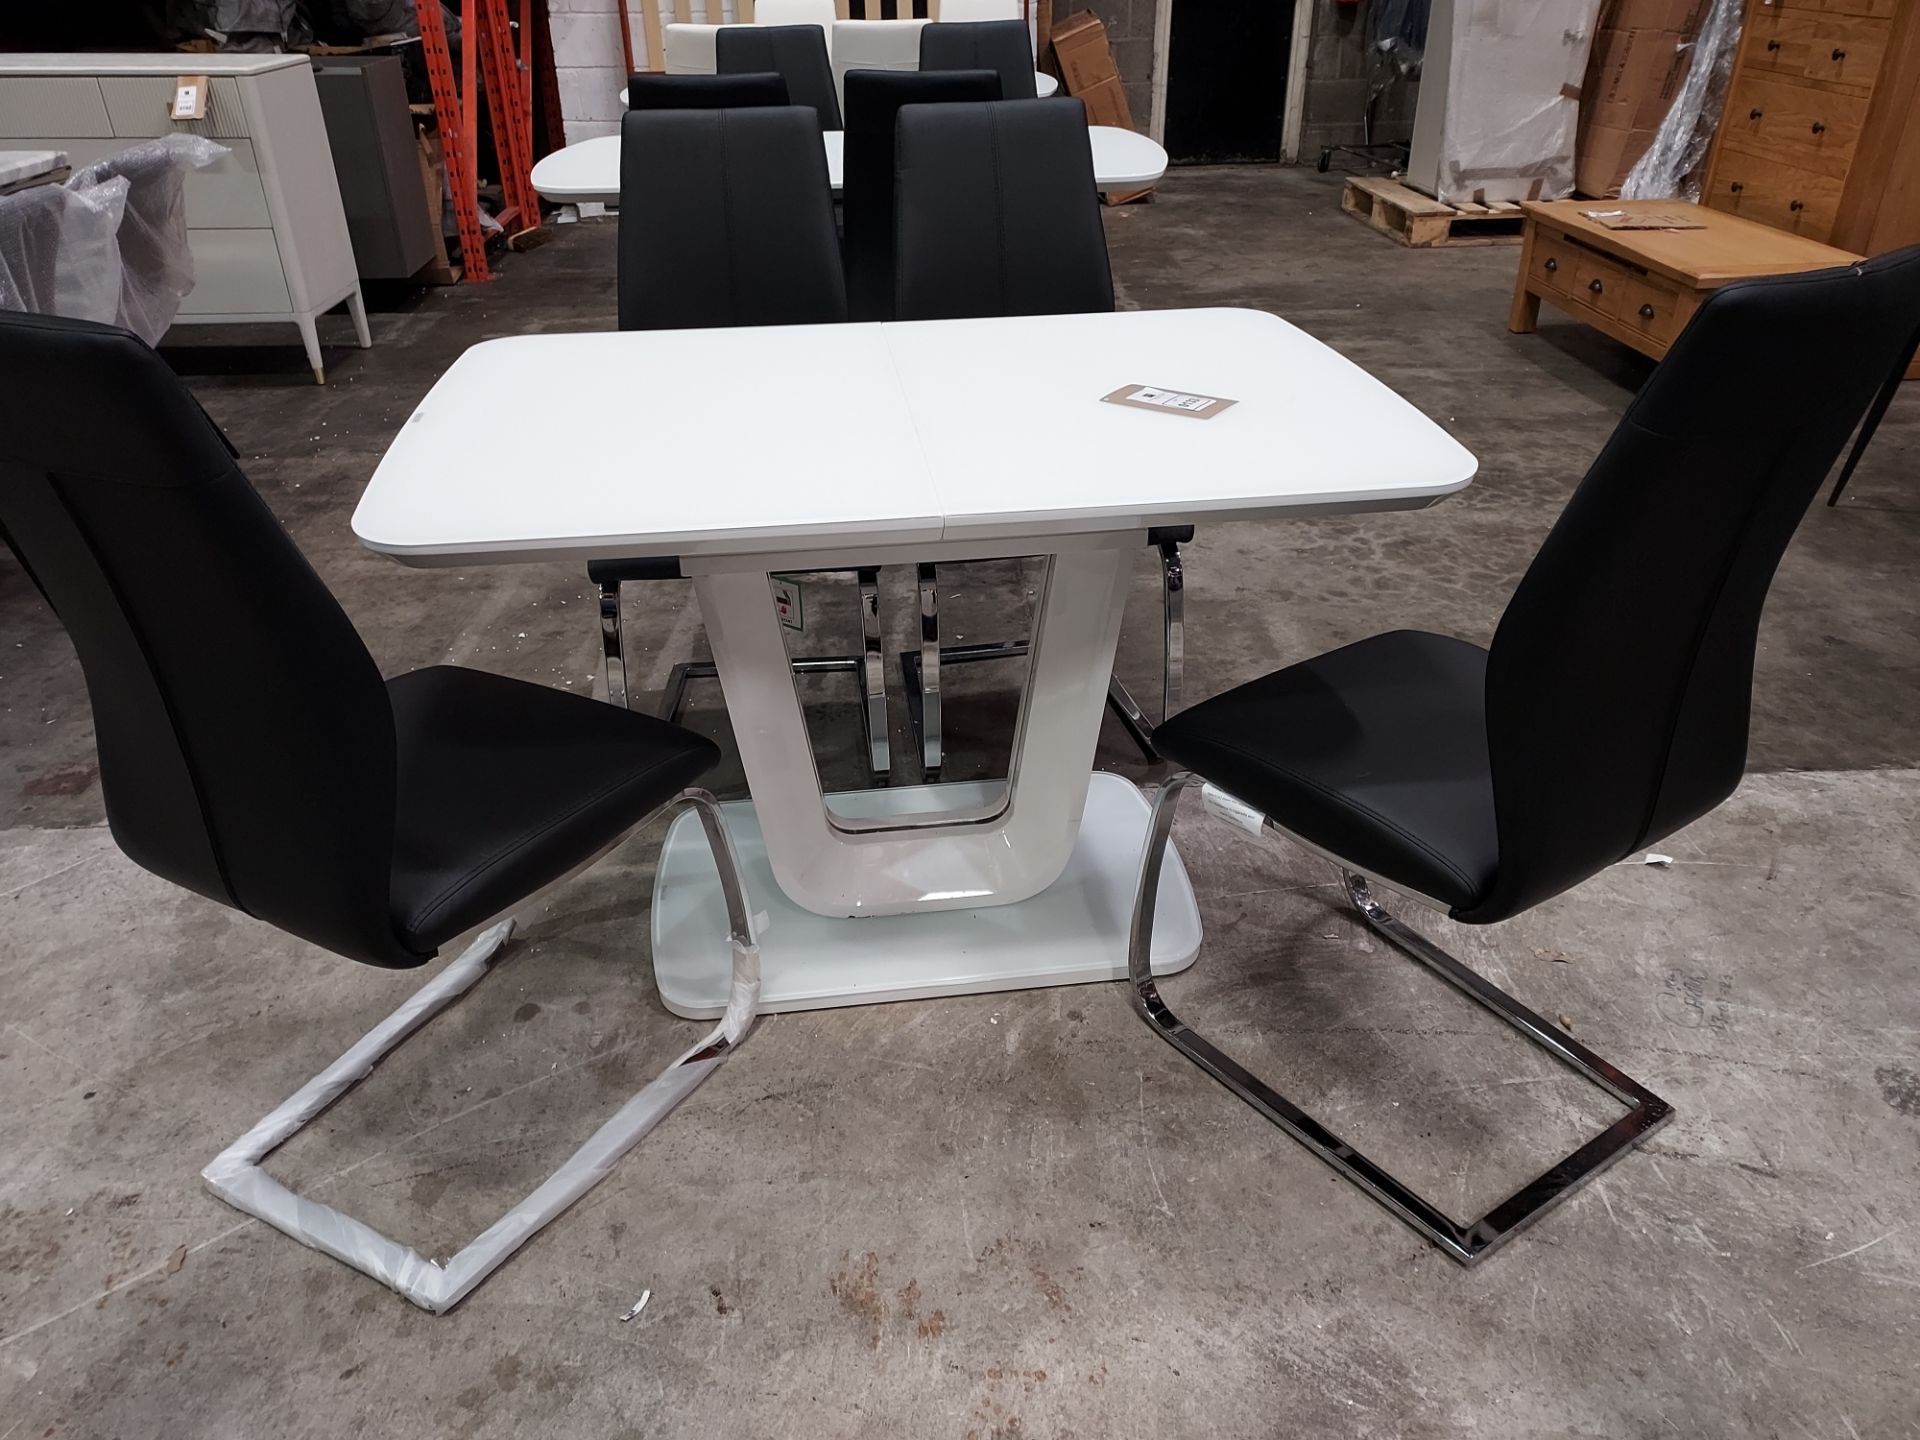 1 X LAZZARO GLASS TOP EXTENDABLE DINING TABLE - IN WHITE WITH 4 X LAZZARO LEATHER LOOK BLACK